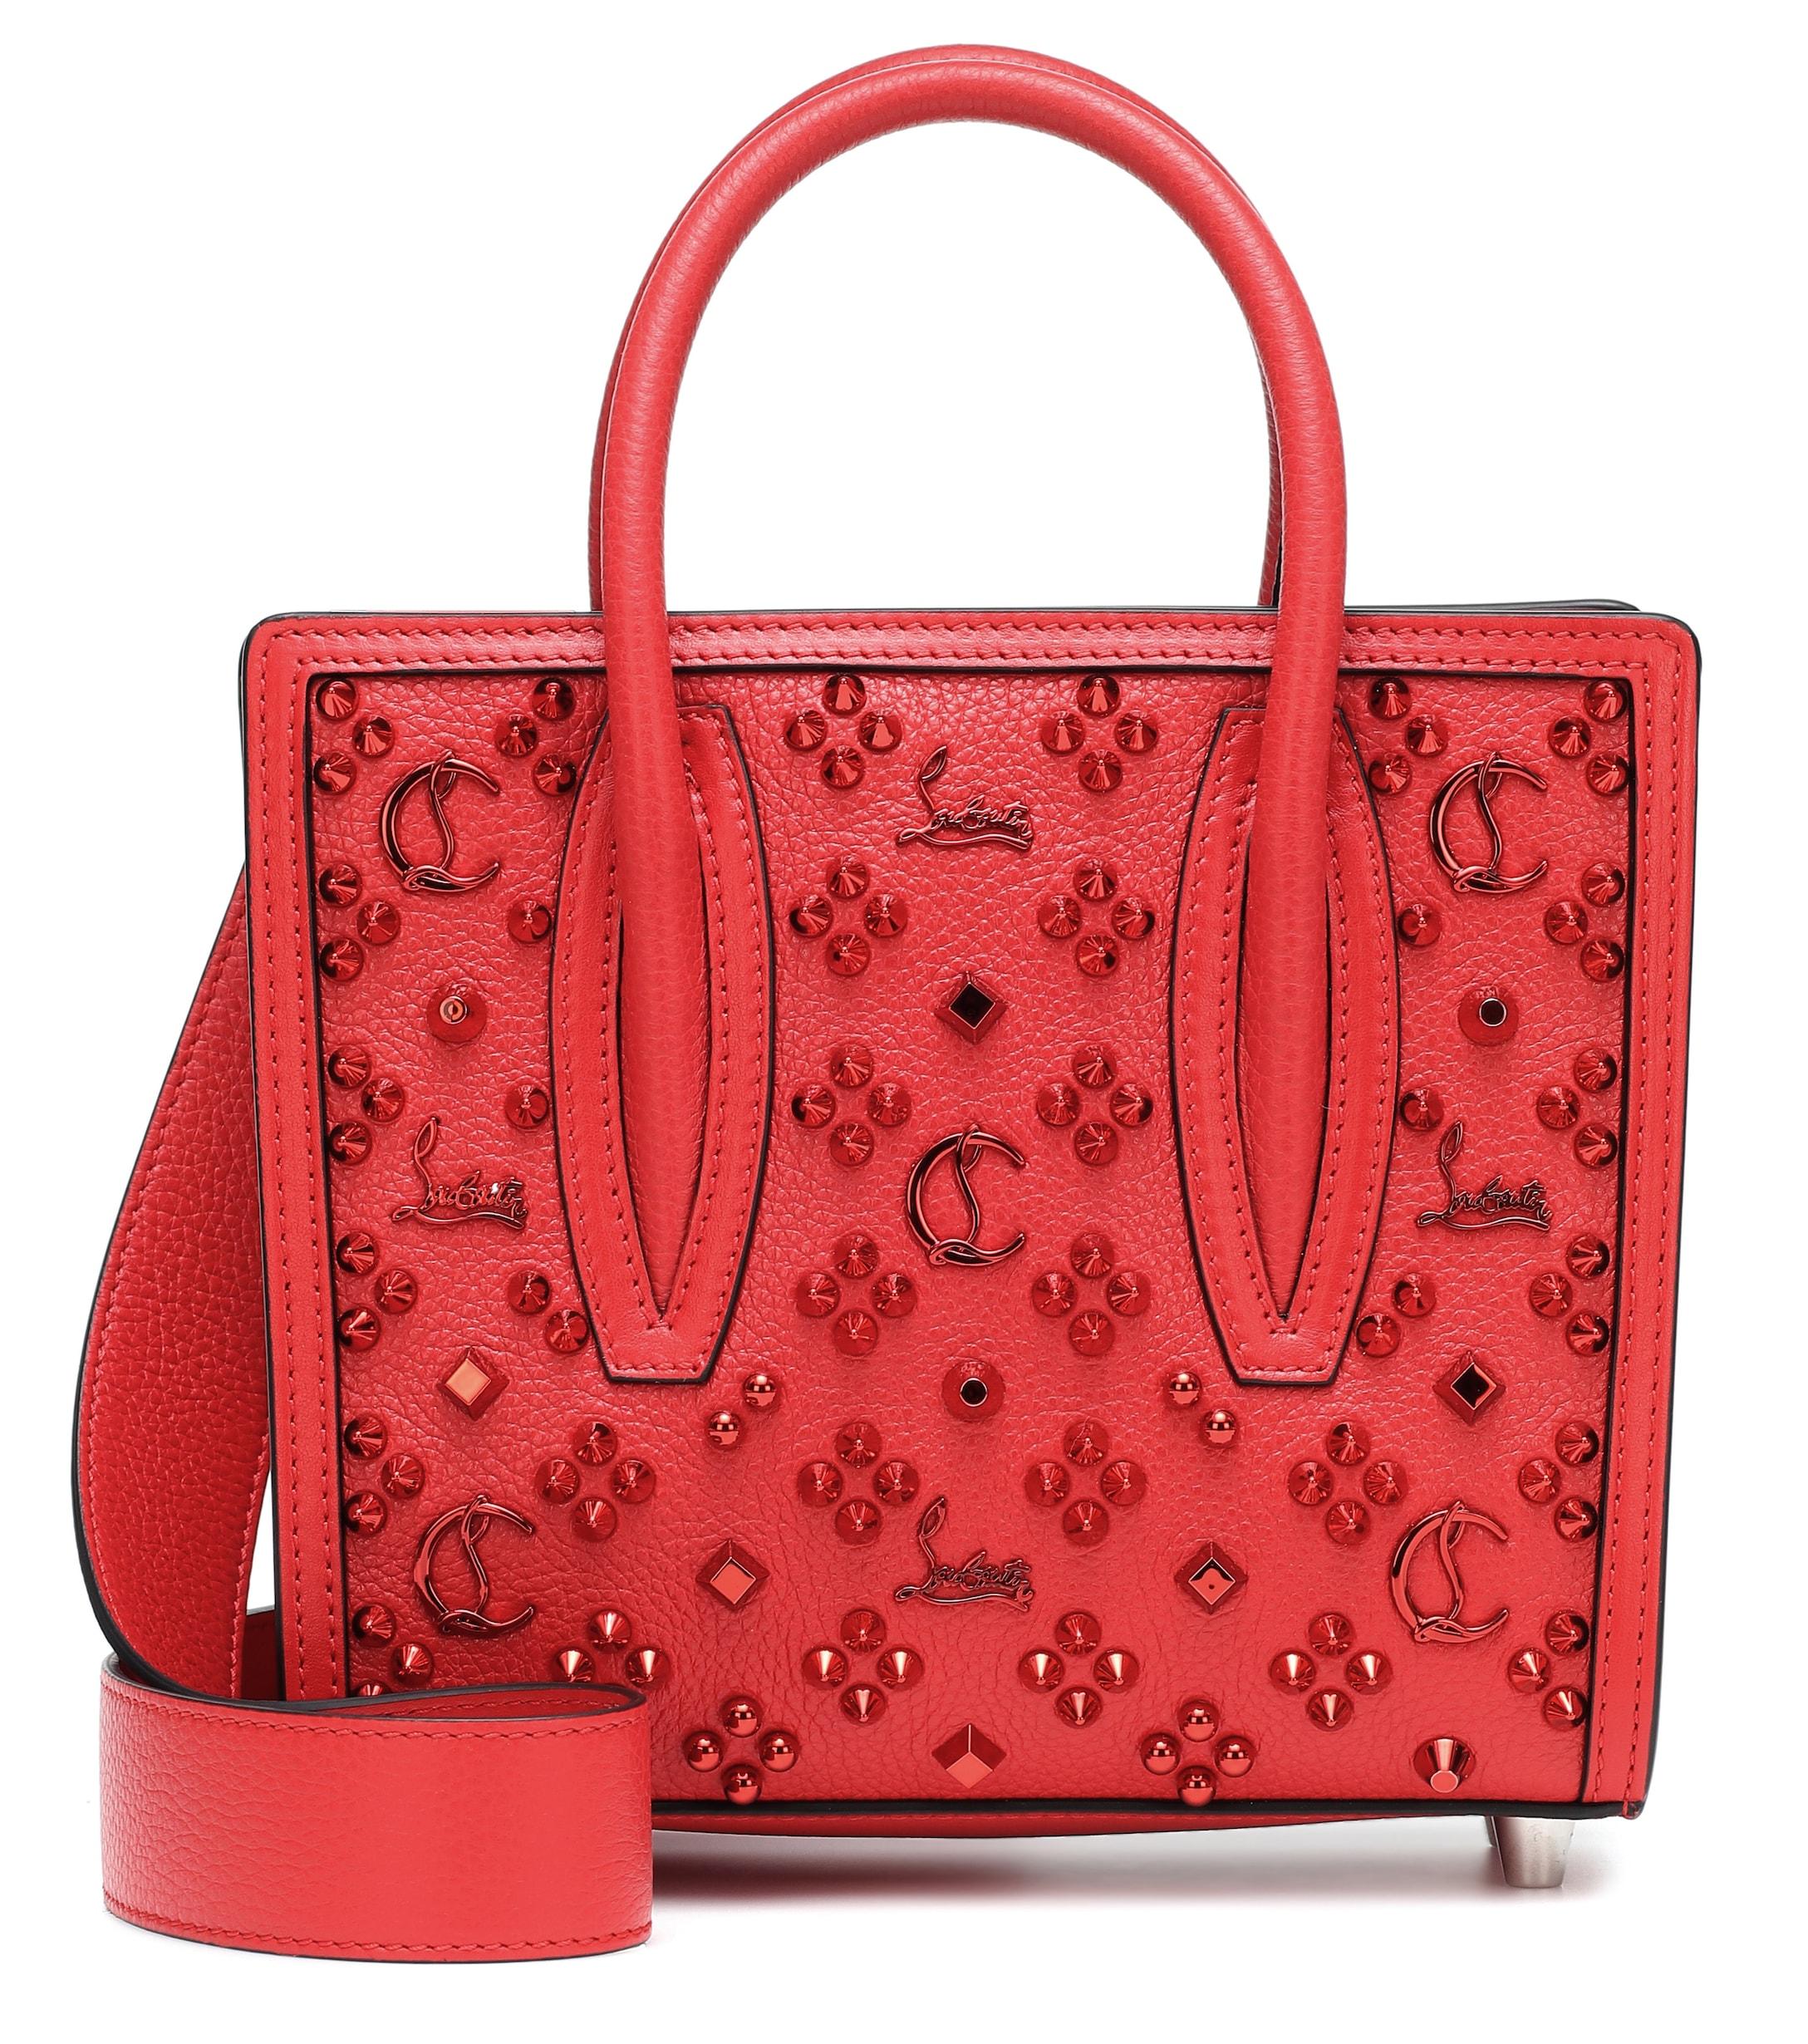 Mose værdighed propel Christian Louboutin Paloma S Mini Leather Tote in Red | Lyst